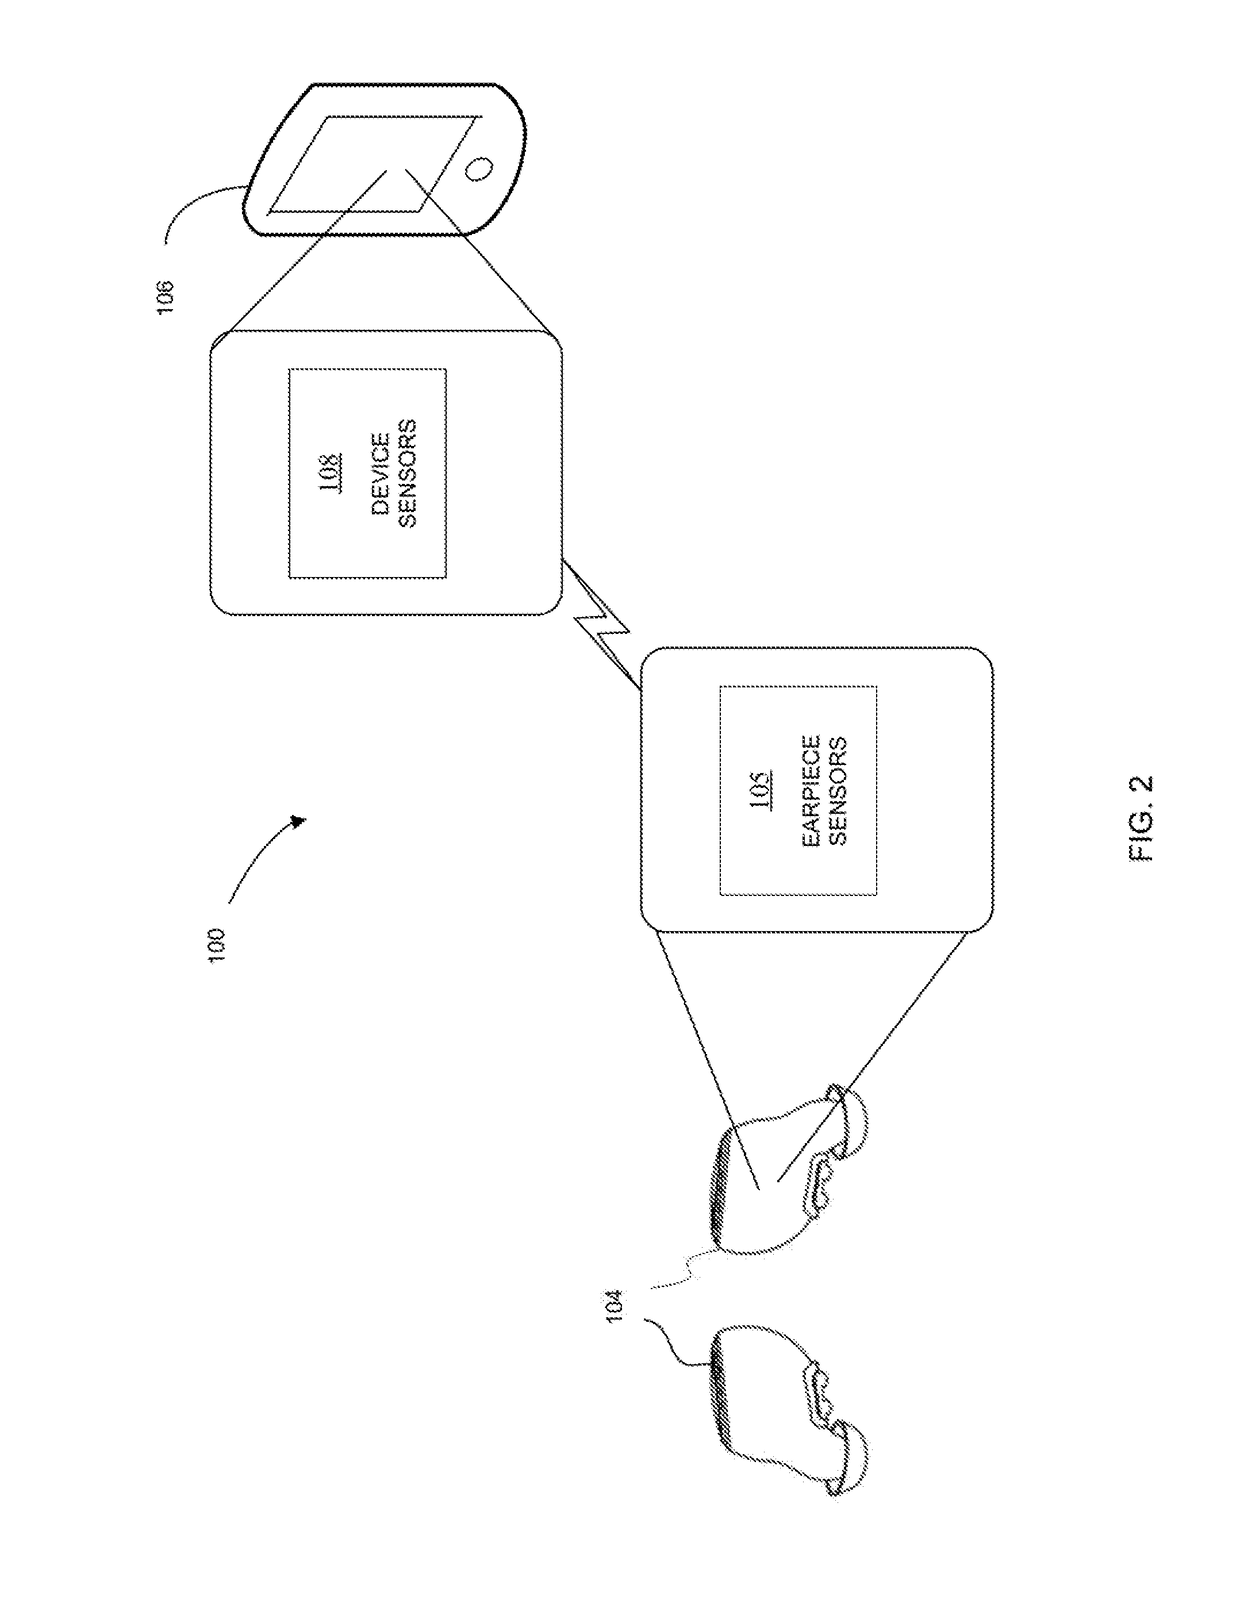 Neuropathic Diagnosis and Monitoring Using Earpiece Device, System, and Method